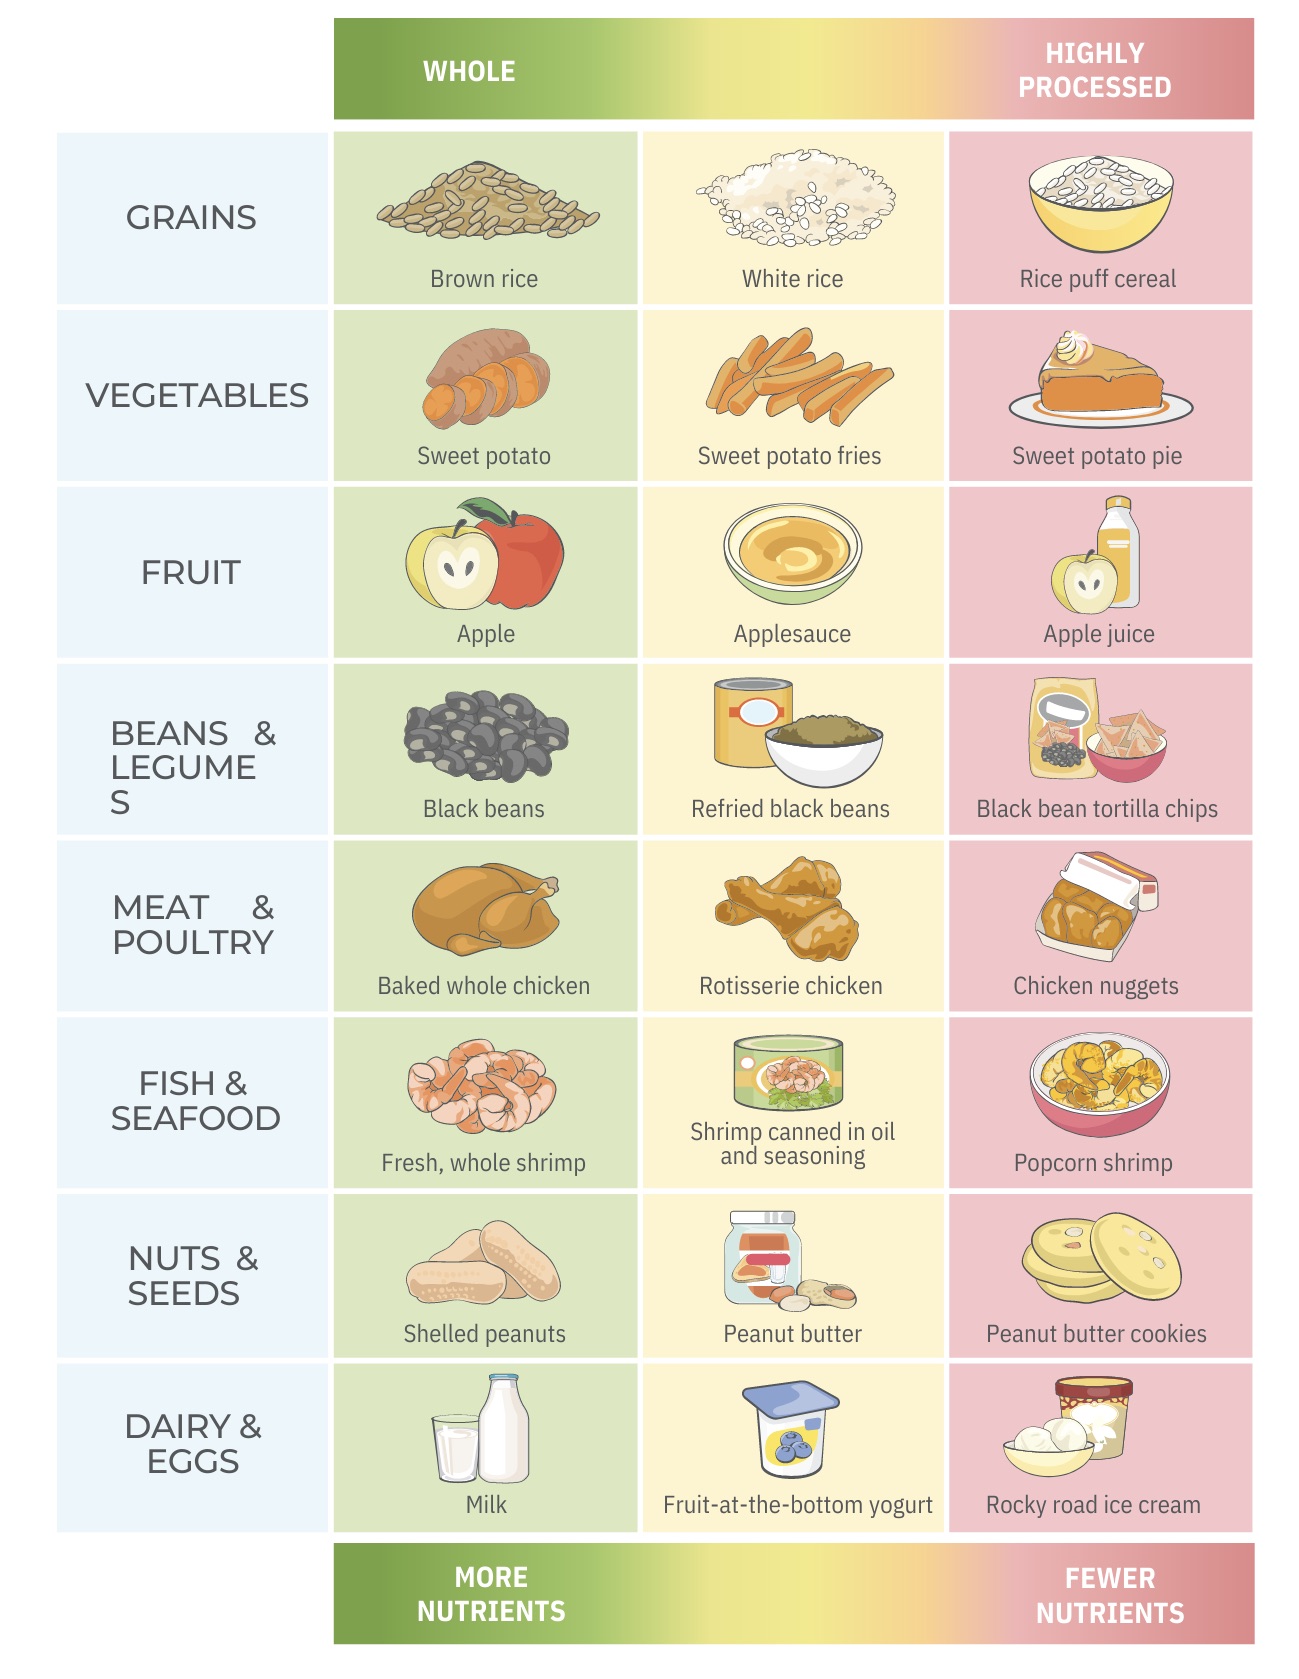 eat whole foods vs highly processed foods